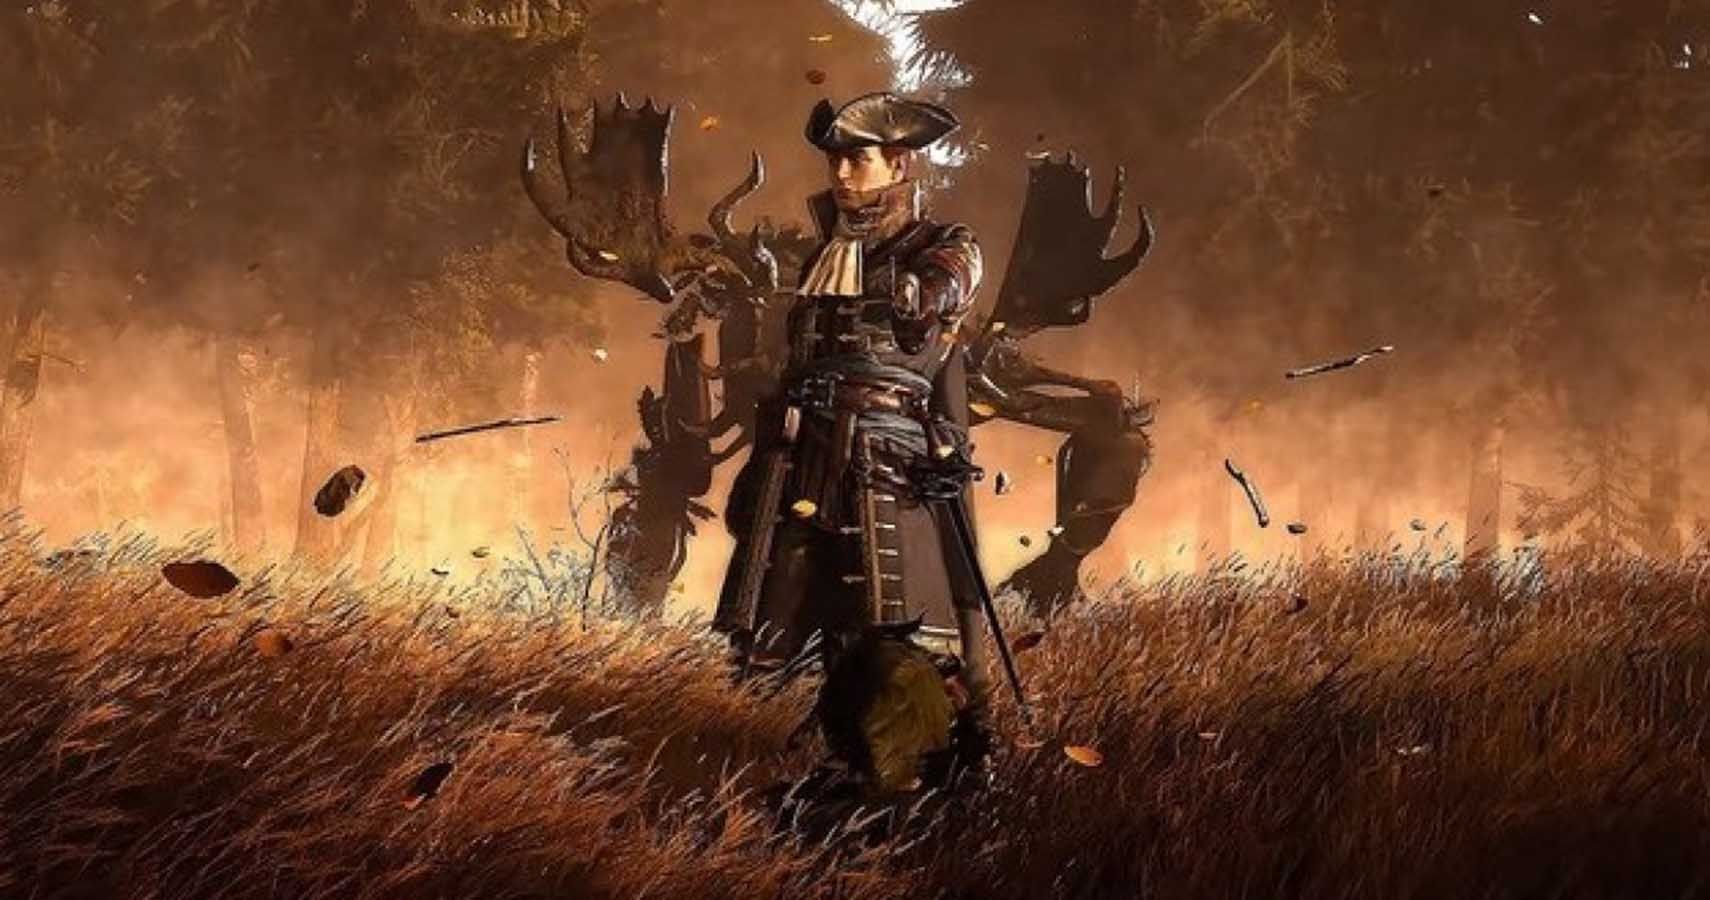 1440p greedfall wallpapers